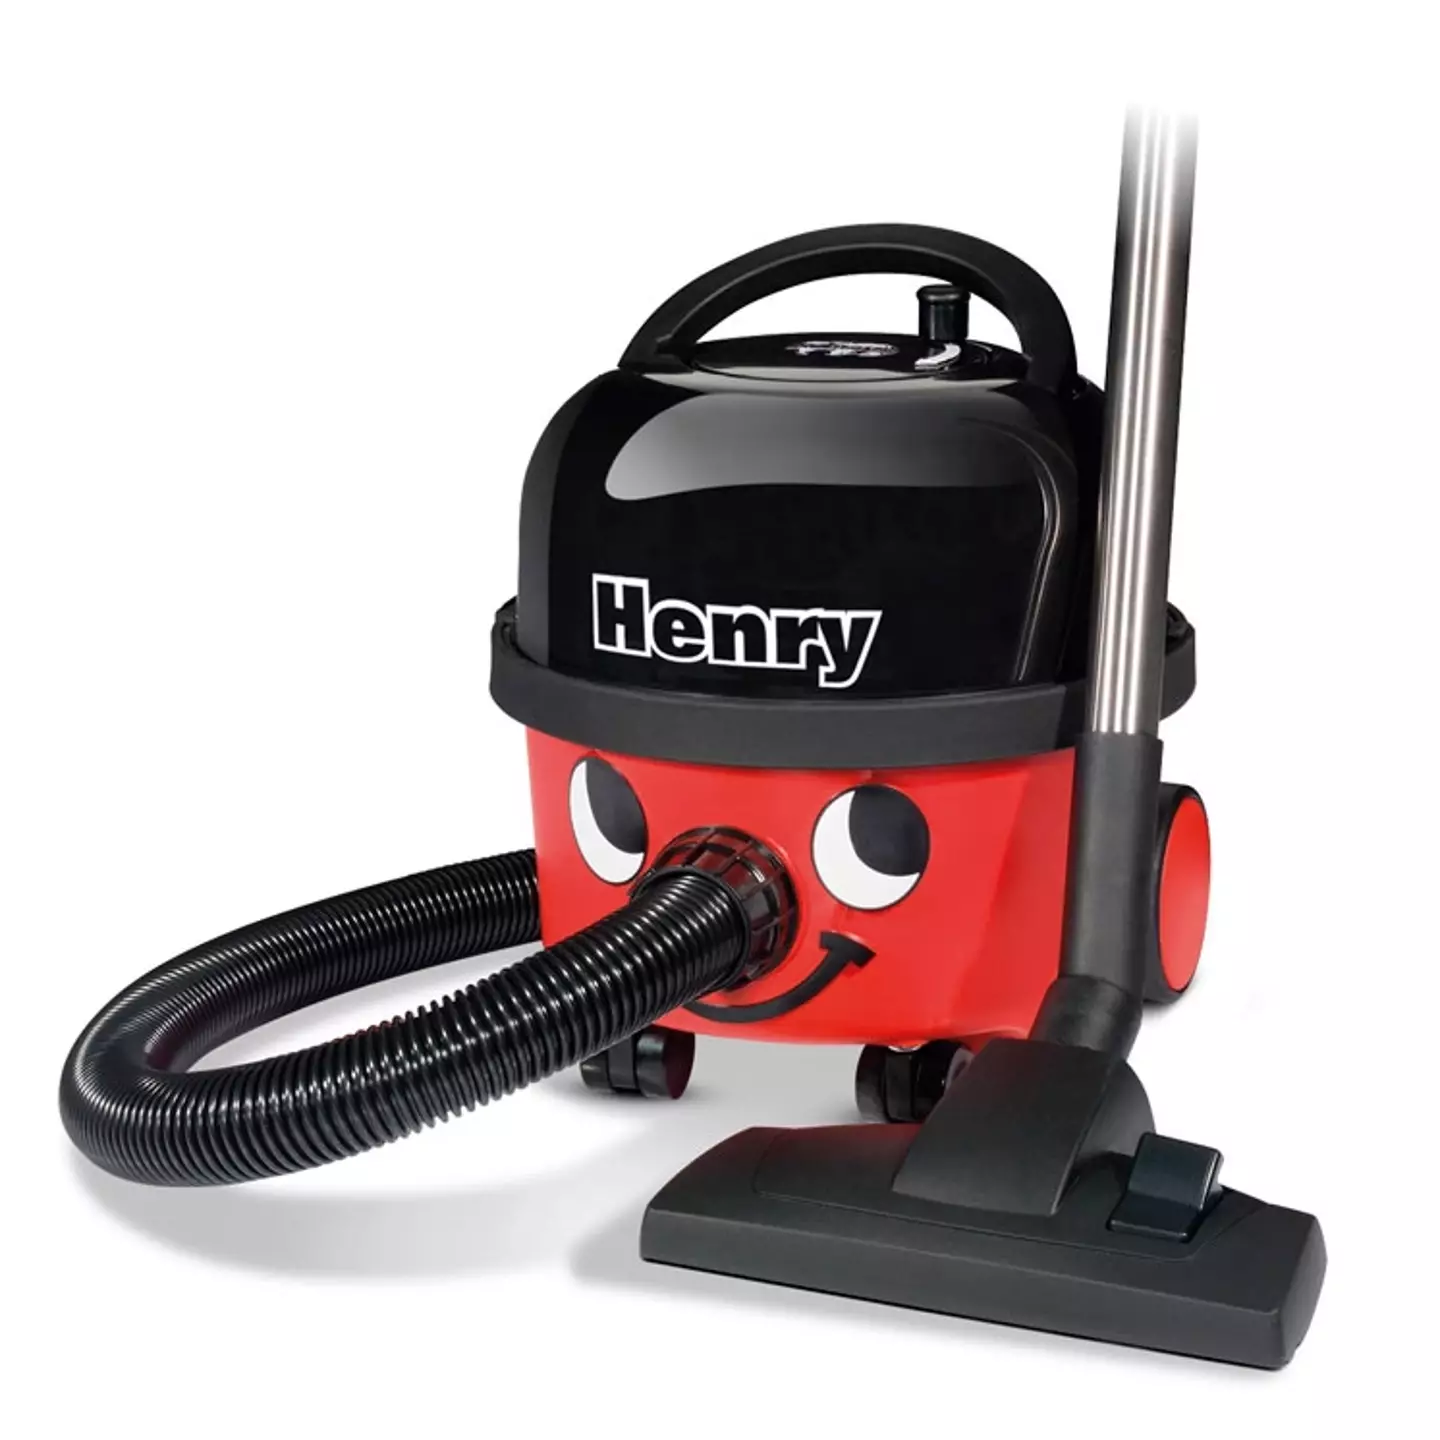 Henry hoovers have been a classic household appliance since the 1980s.